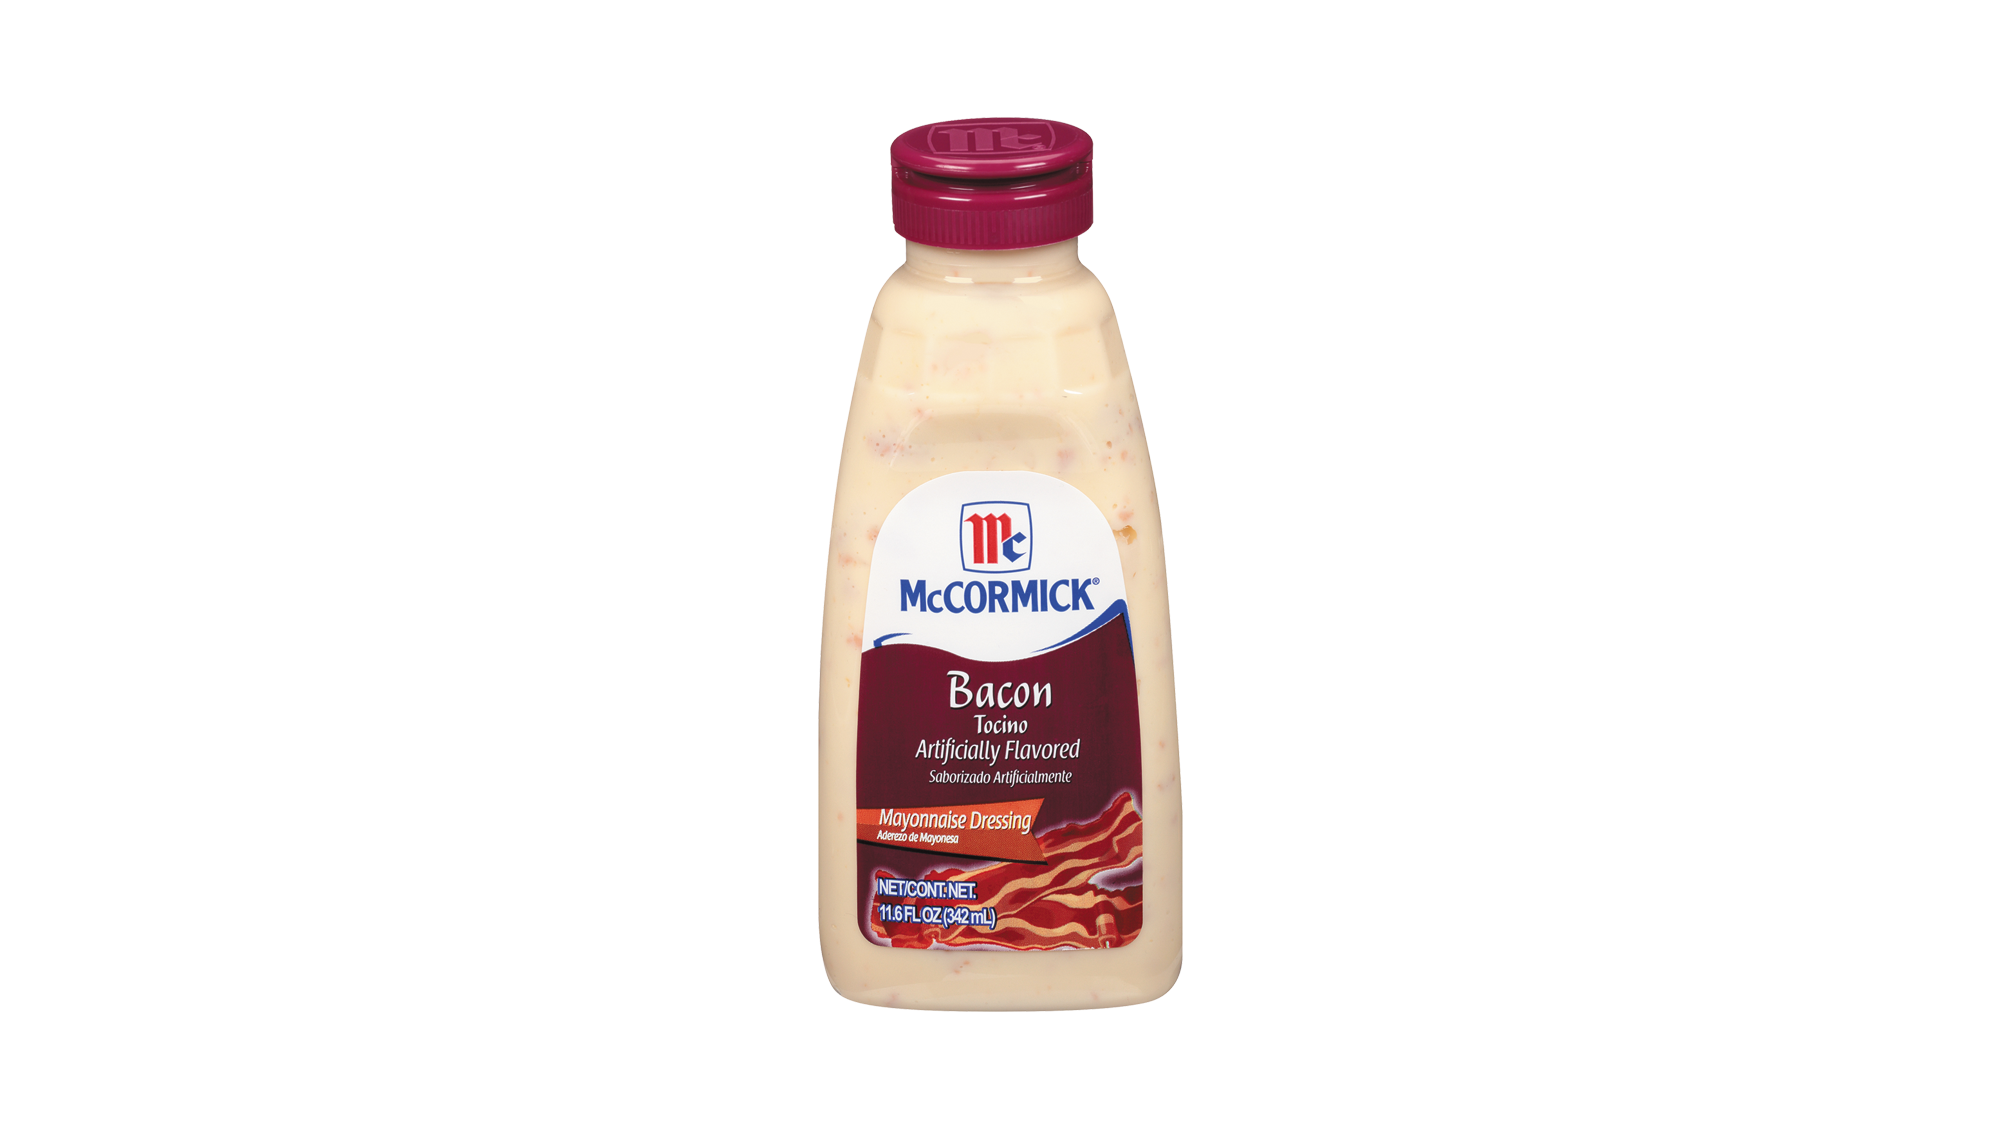 https://mccormick.widen.net/content/qnducpgfzw/original/McCormick_Bacon_McMex_Mayo_Squeeze_2000x1125.png